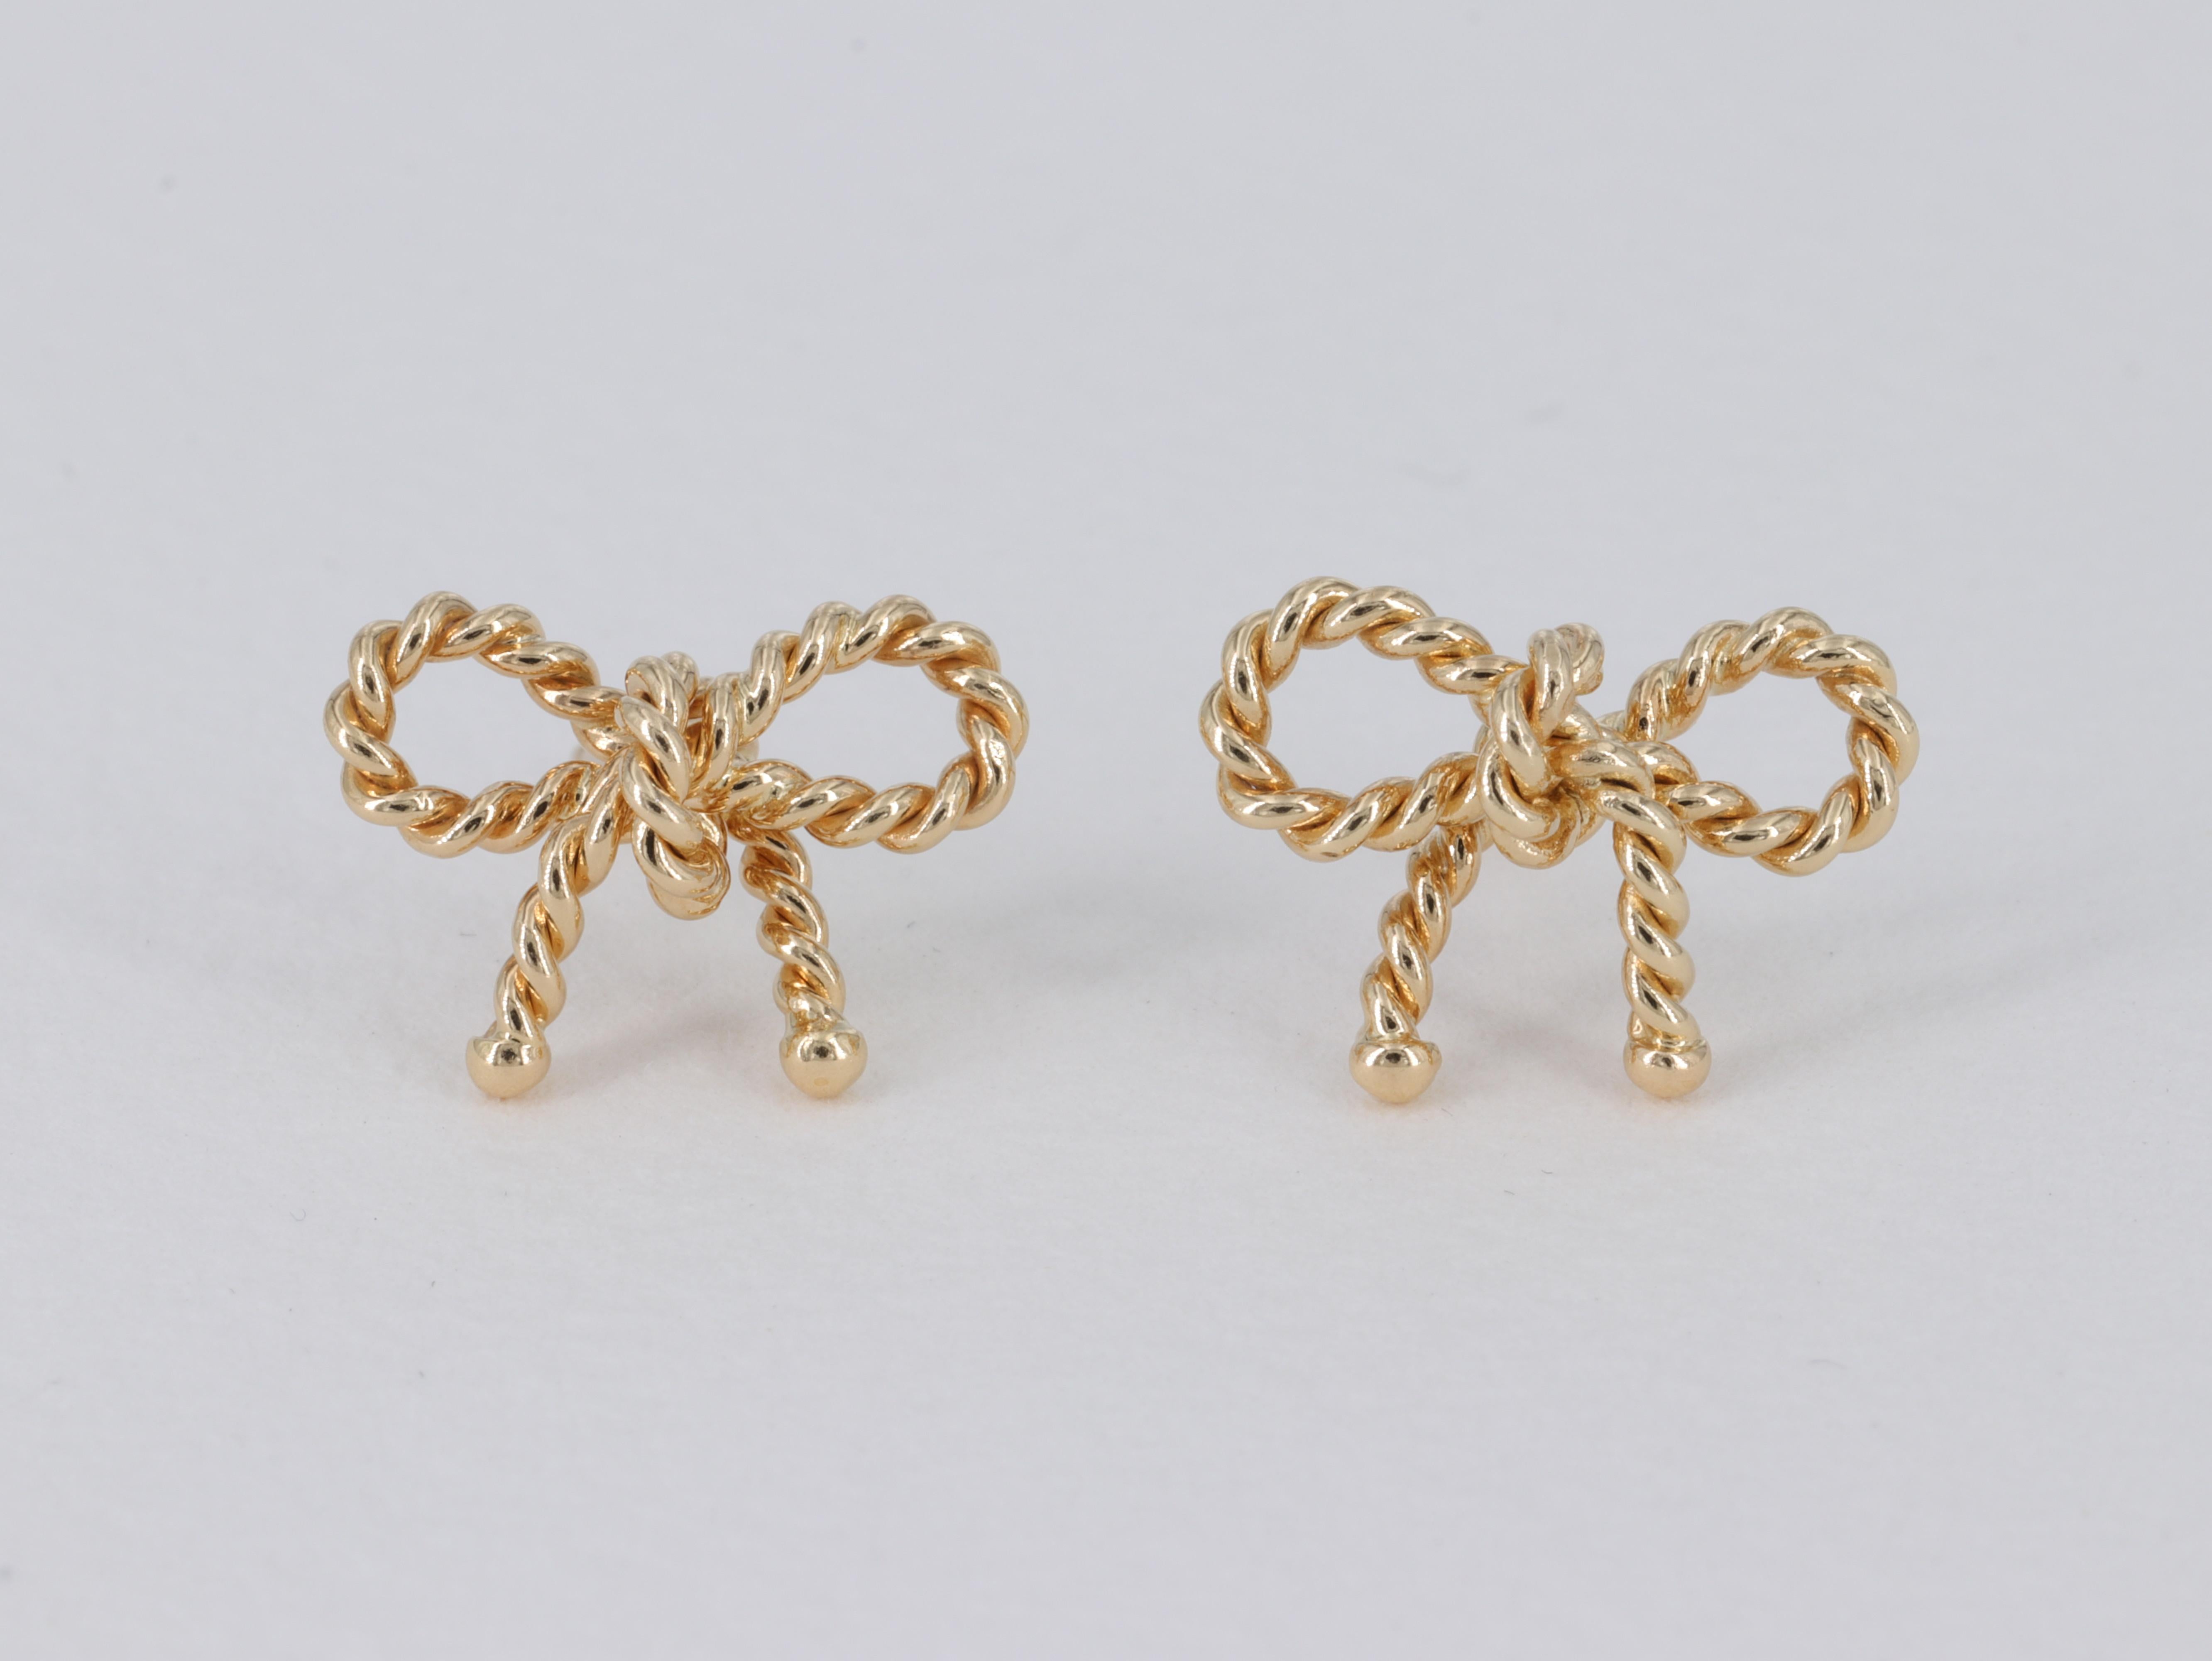 A cute and dainty pair of Tiffany & Co. rope bow earrings crafted in solid 18 karat yellow gold, just the right size and the perfect addition to a day at the beach or on the boat. 

Looking for a set?

We also have in stock a matching Tiffany and Co